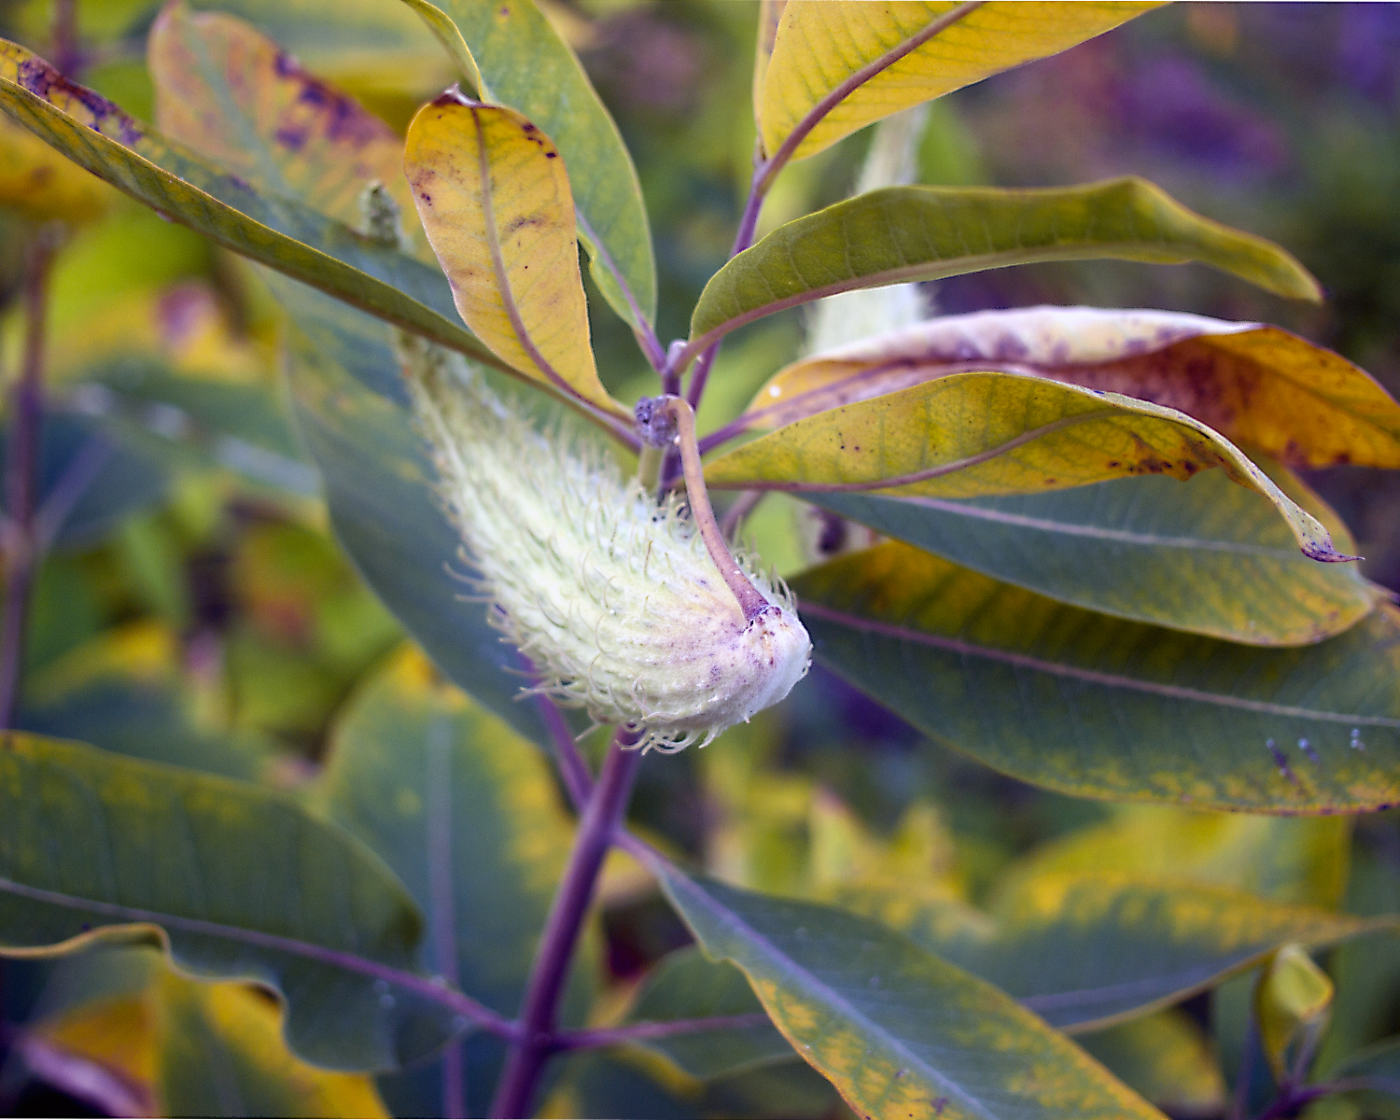 white teardrop shaped pod with fine hairs on a plant of drying green-to-yellow leaves with purple stems and accents